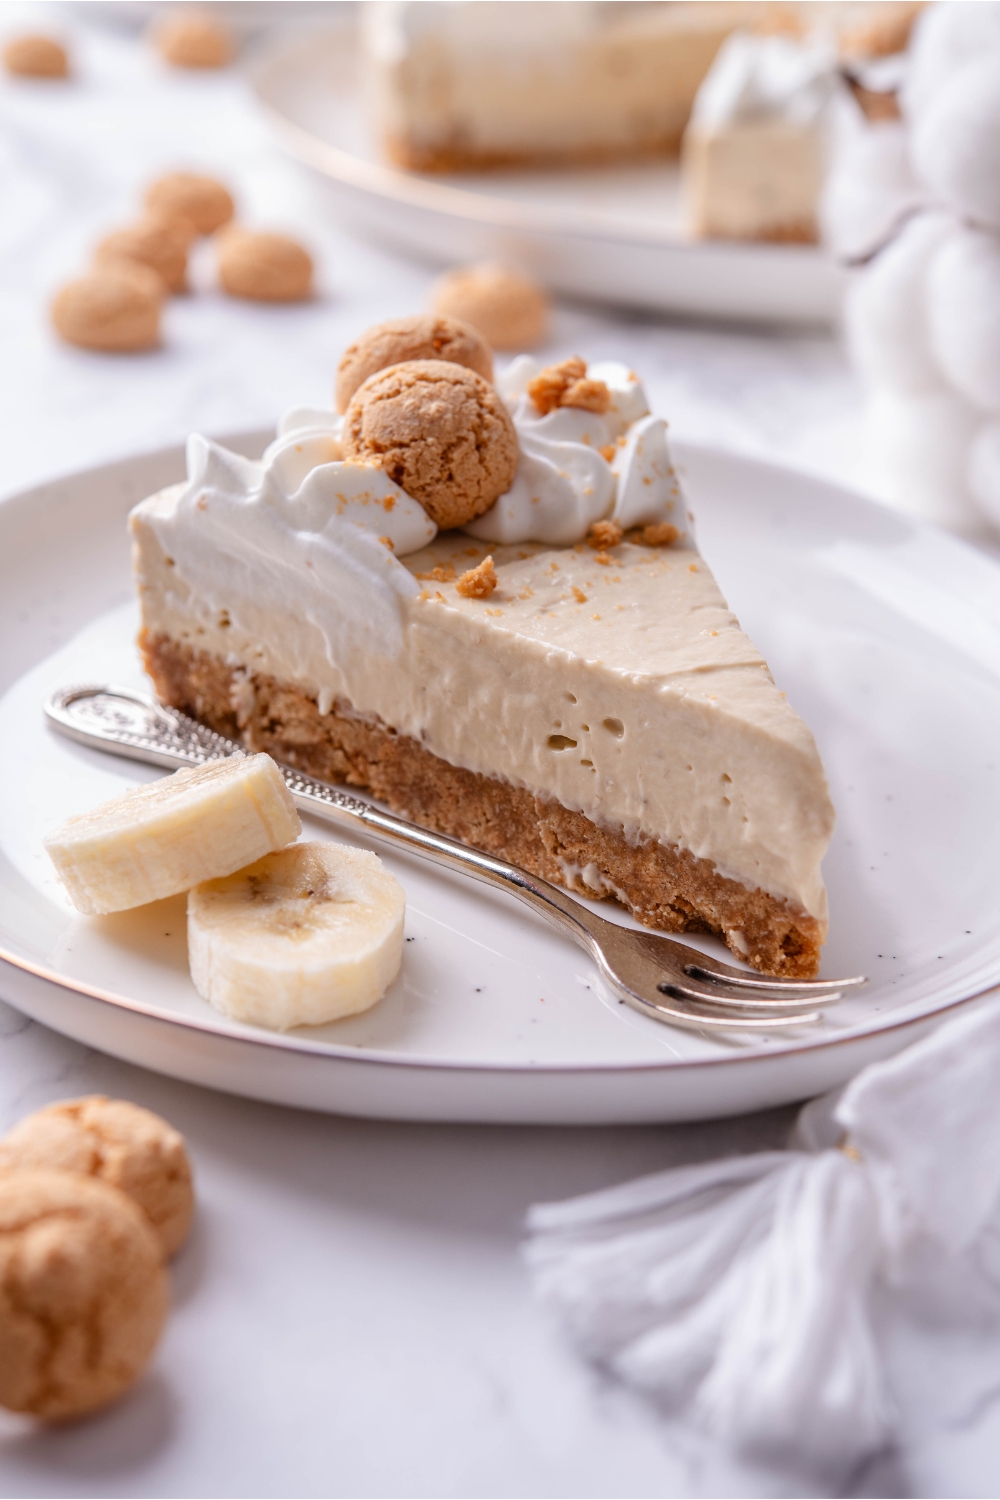 A serving of banana cheesecake on a plate with two banana slices and a fork. The cheesecake has a cookie crust and is topped with whipped cream and mini cookies.